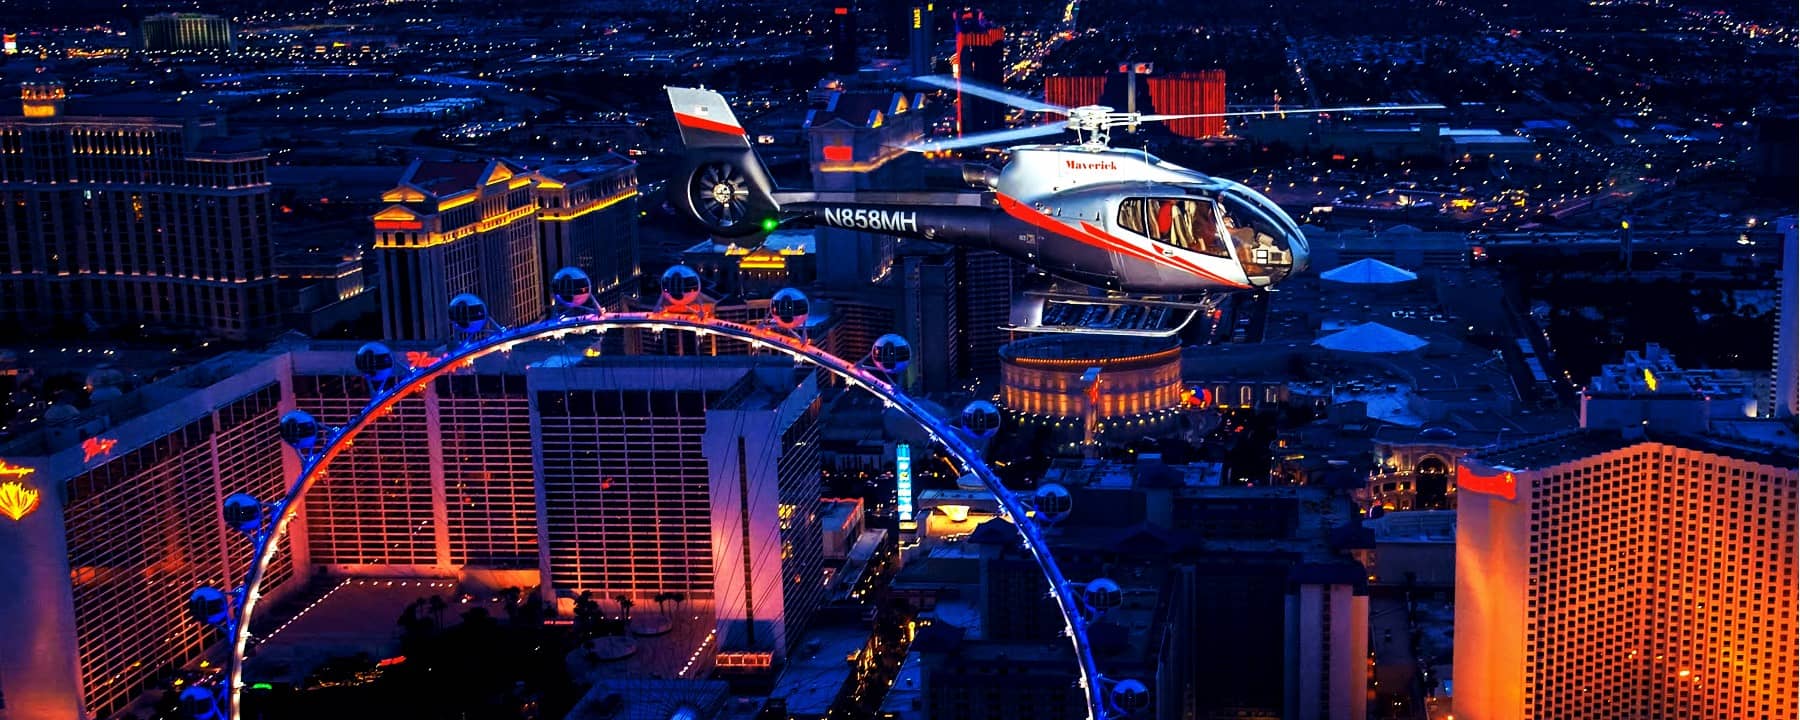 Las Vegas Sightseeing by Land and Air